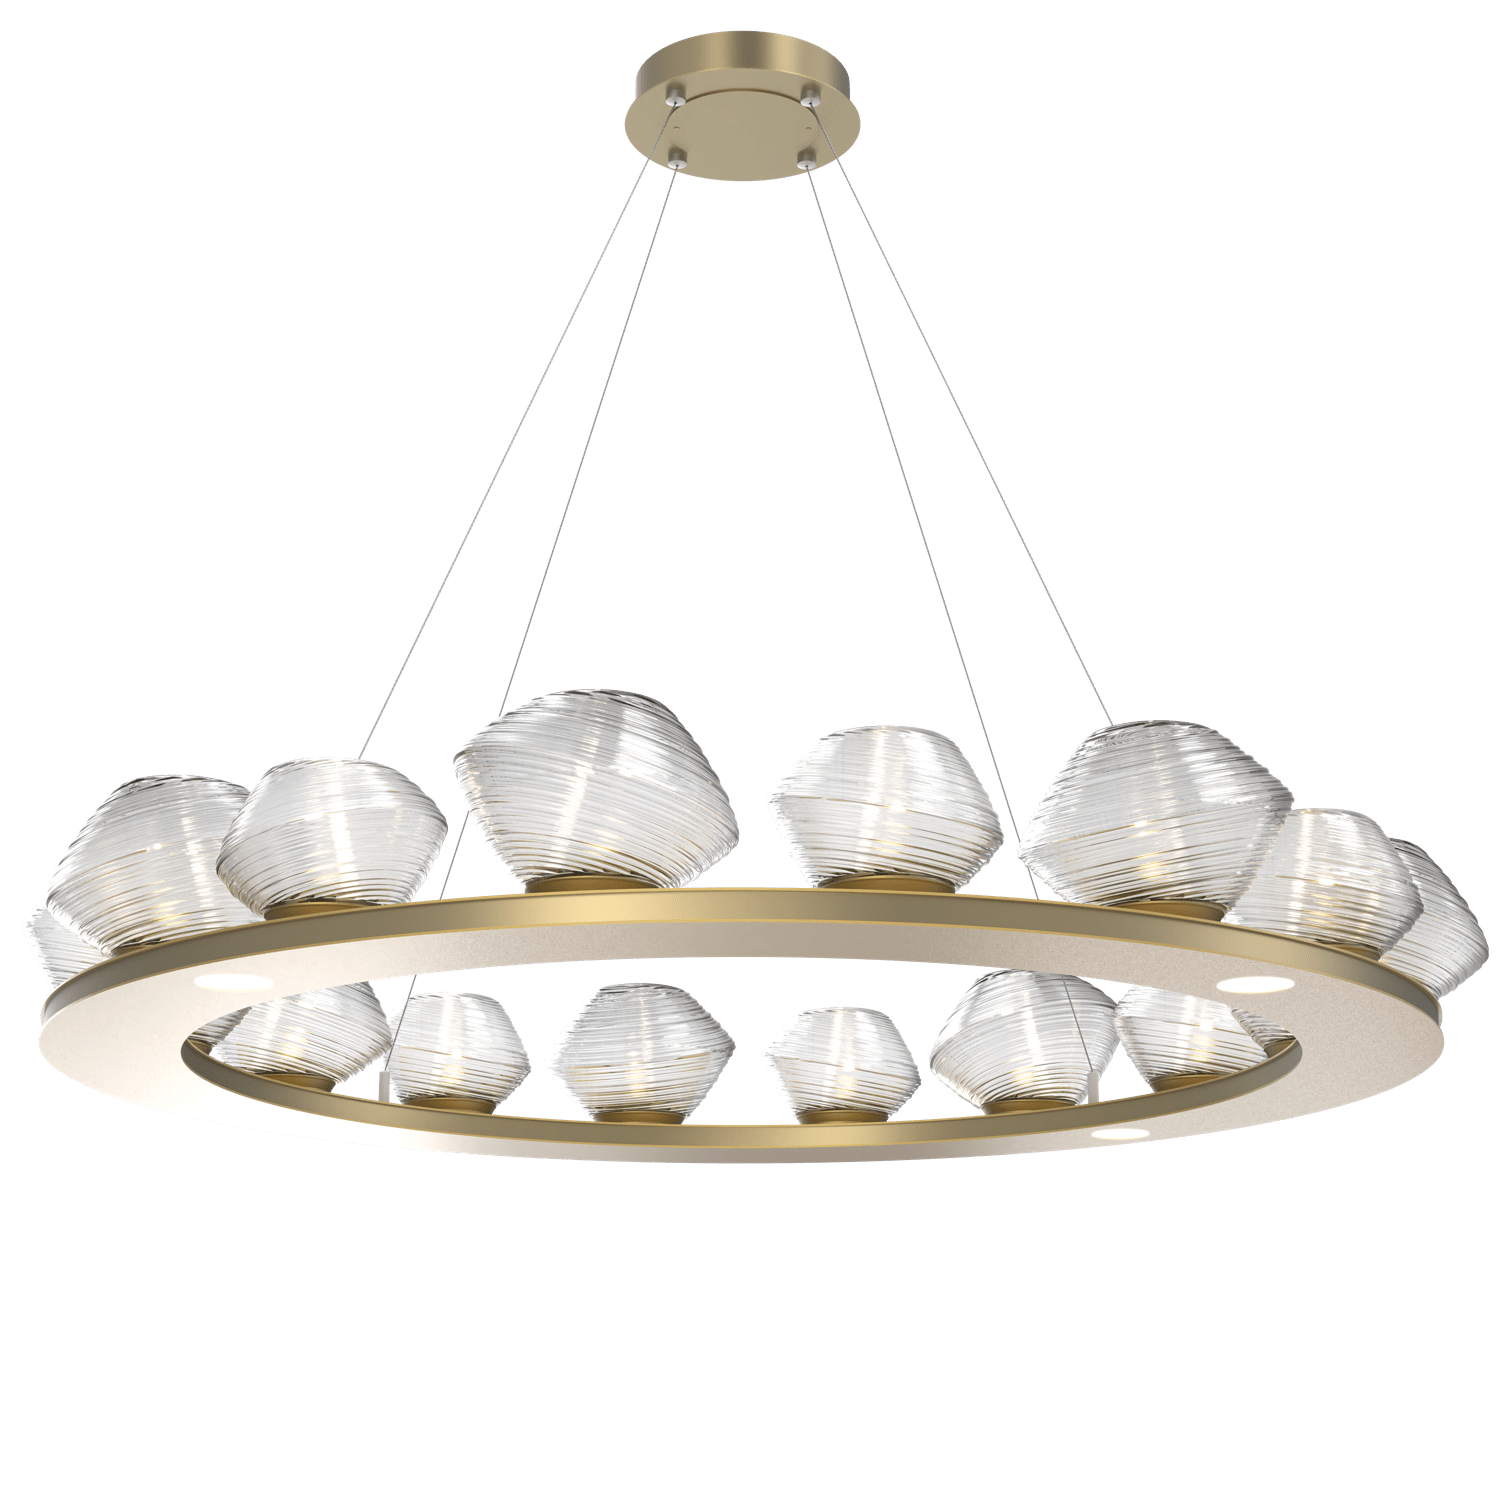 CHB0089-0D-GB-C-Hammerton-Studio-Mesa-48-inch-ring-chandelier-with-gilded-brass-finish-and-clear-blown-glass-shades-and-LED-lamping